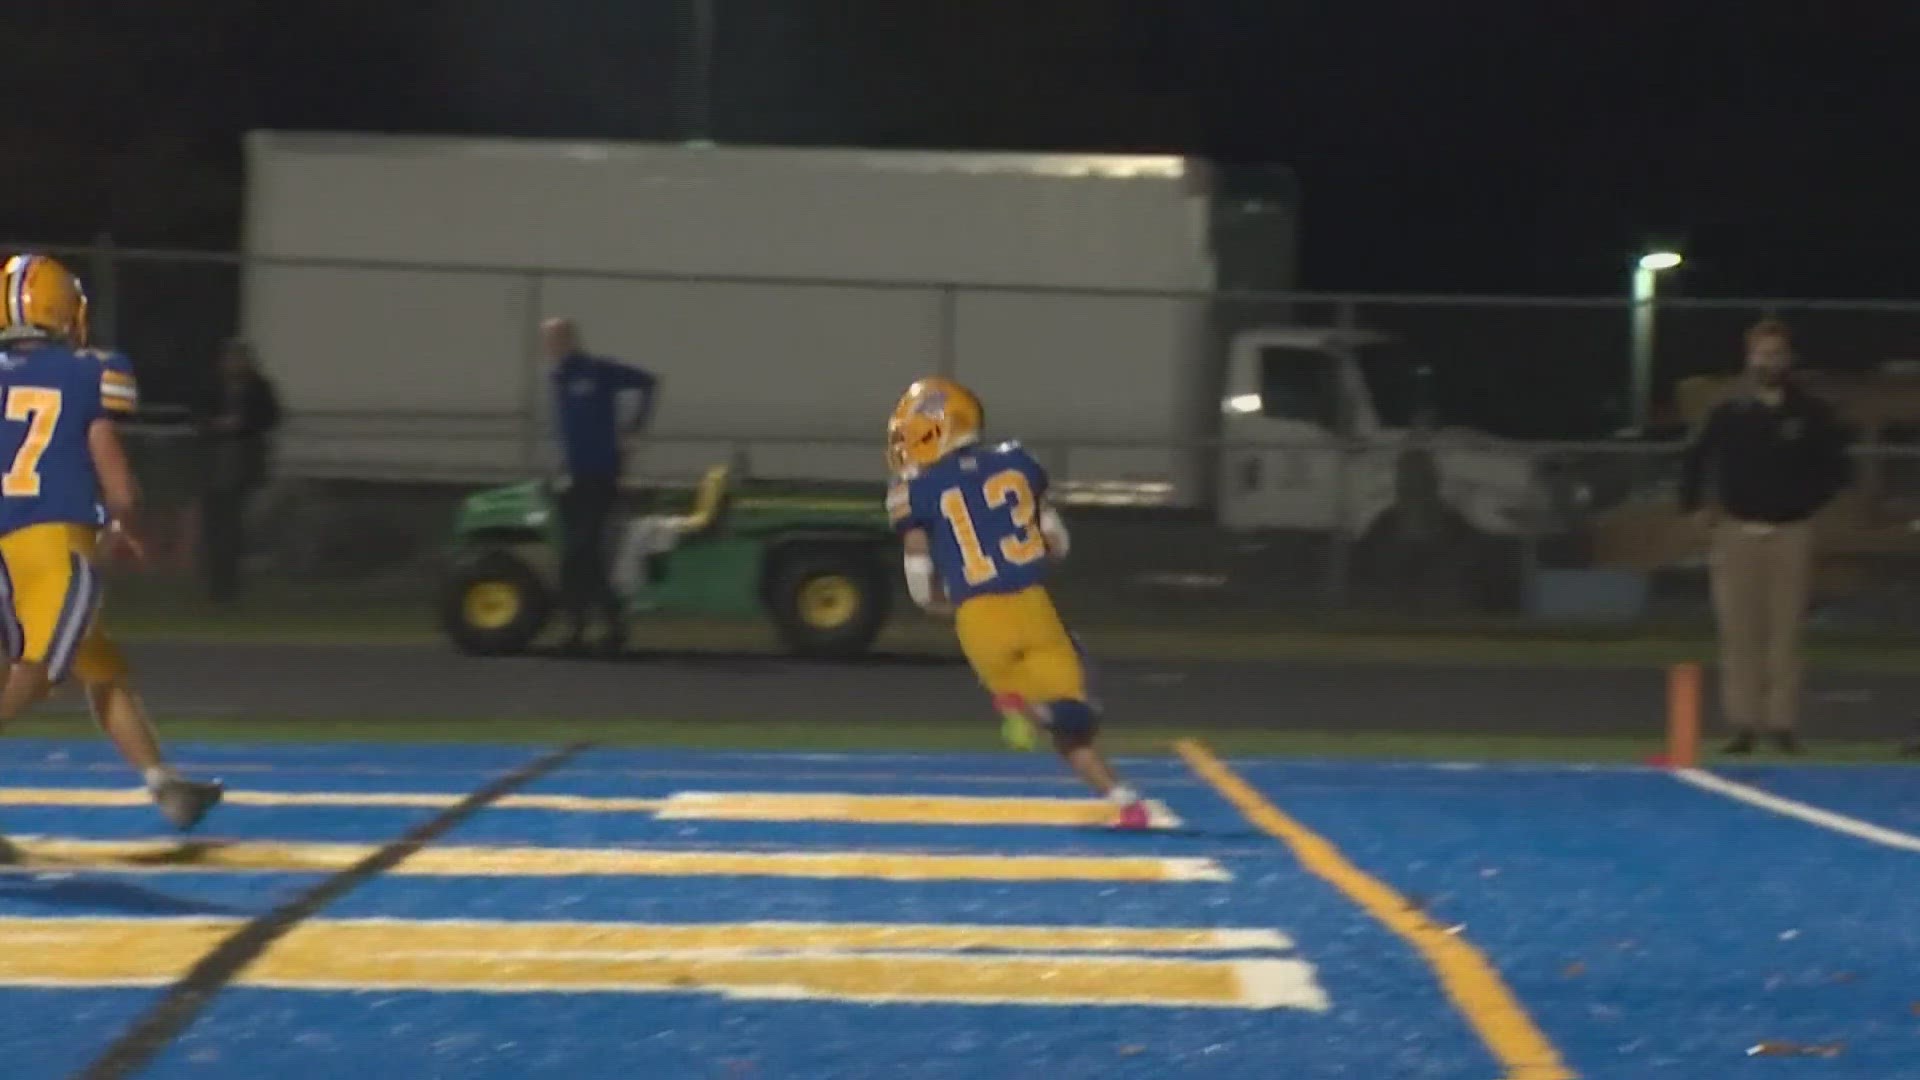 This week's 10TV Athlete of the Week is Olentangy's Riley Clarkson.